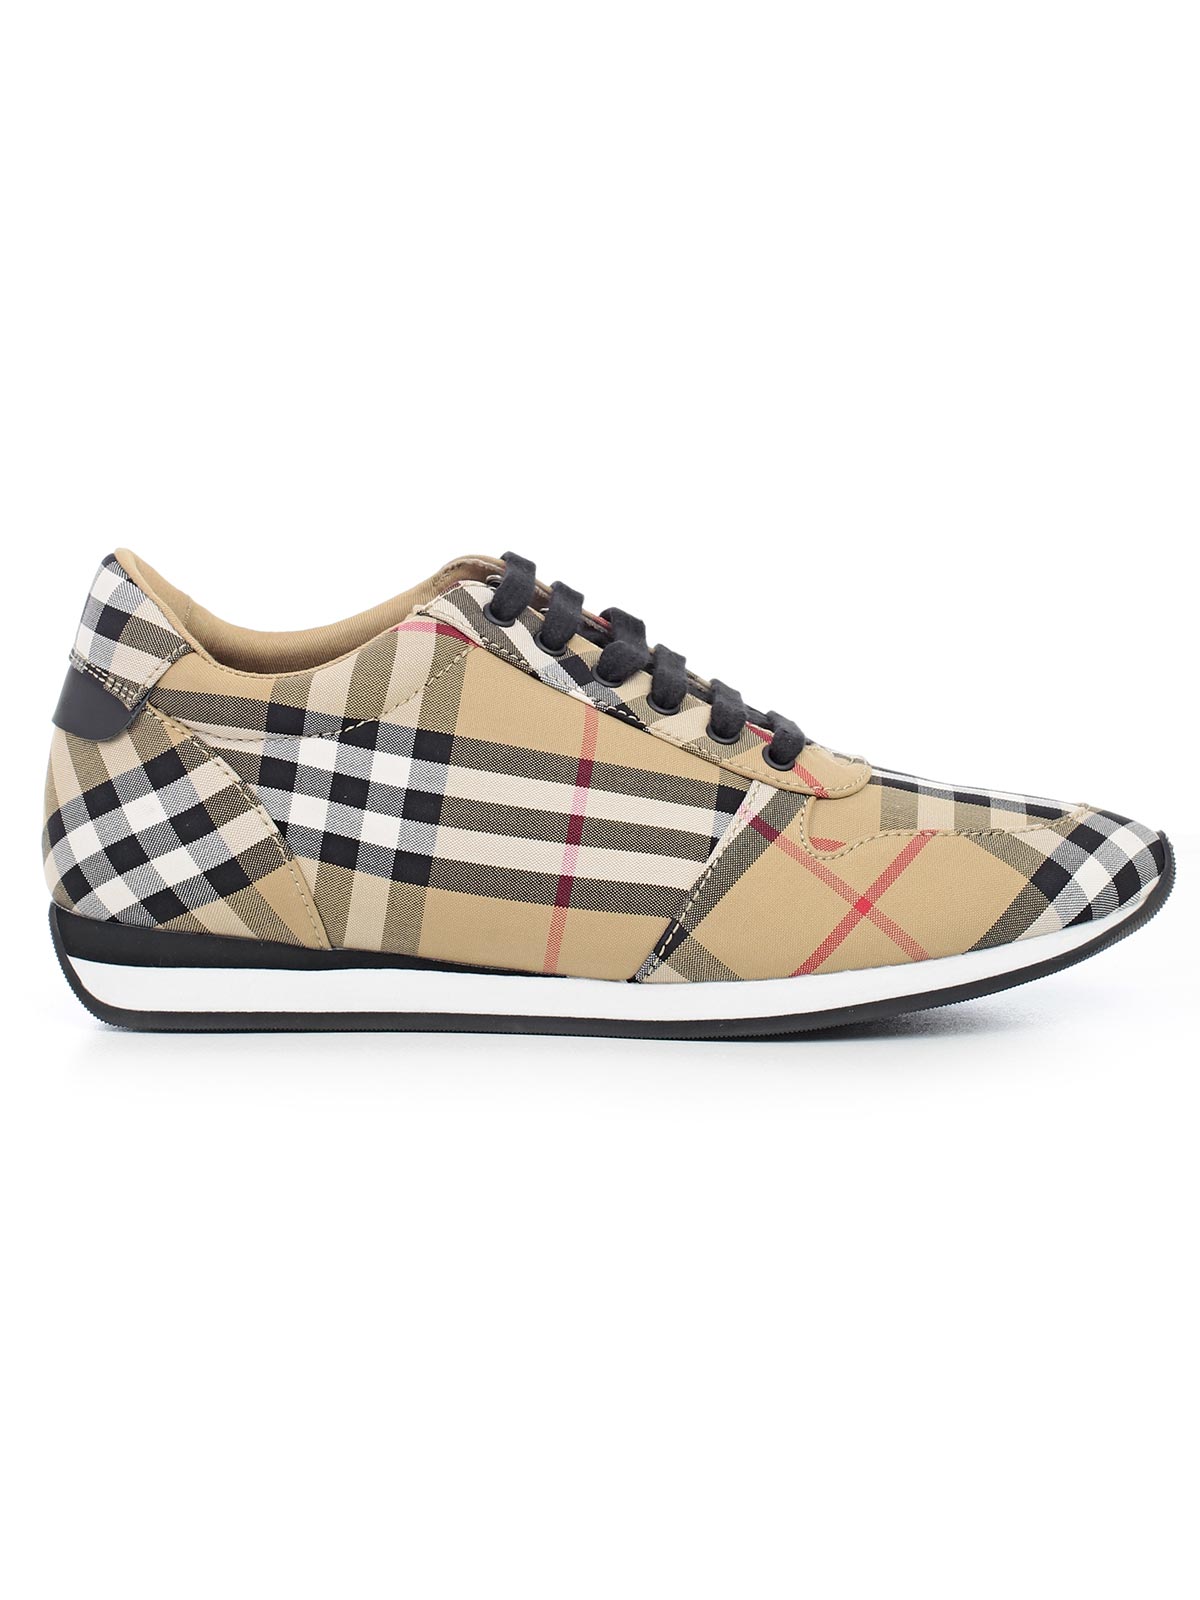 buy burberry shoes online